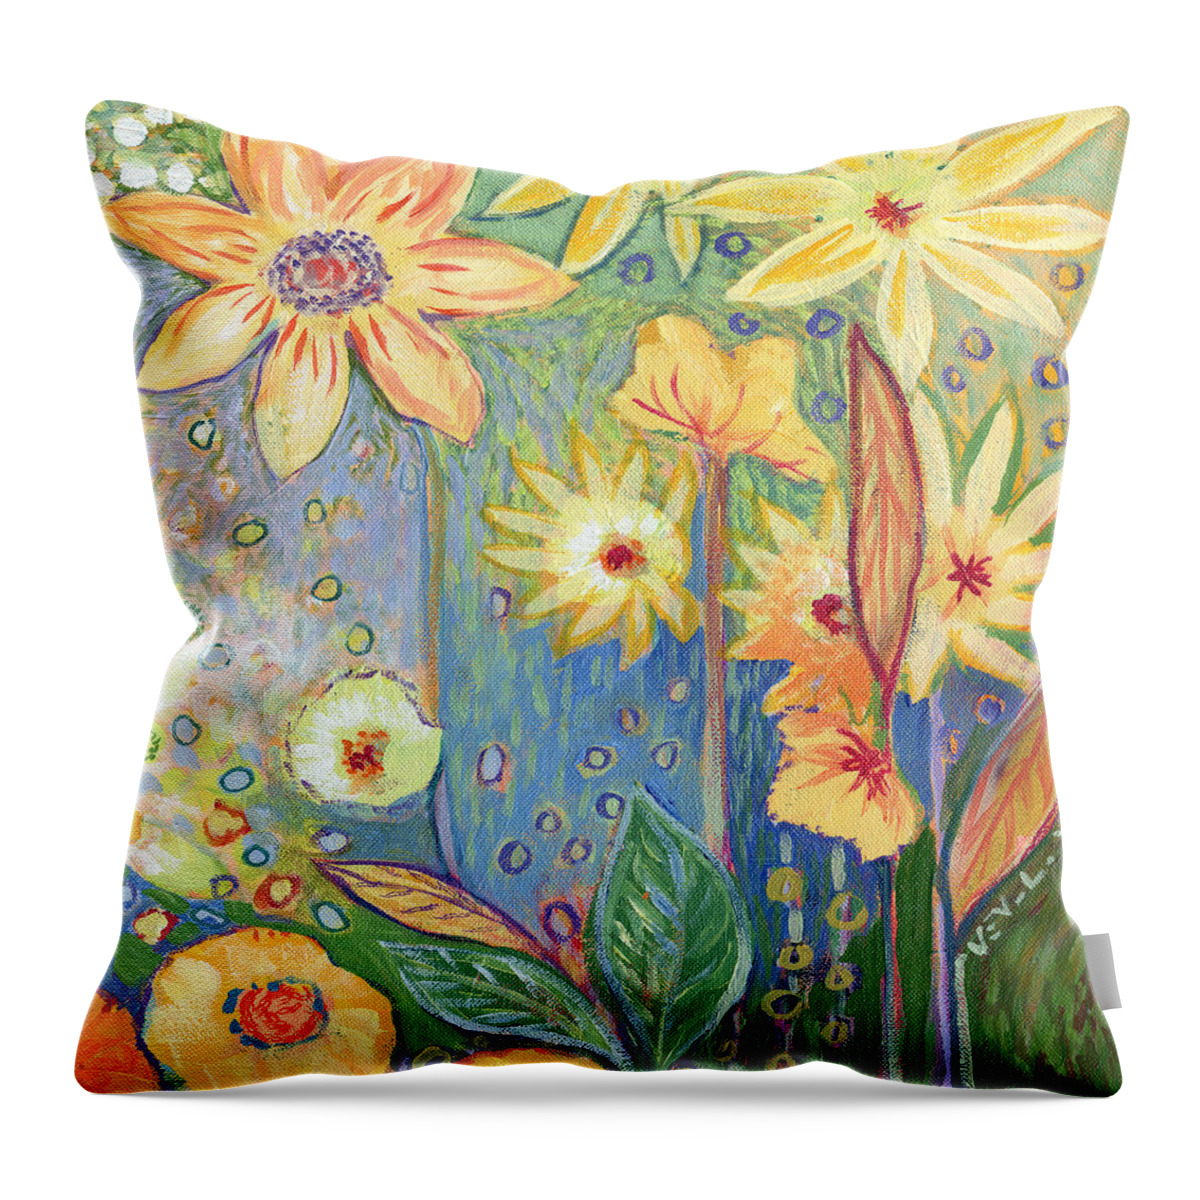 Sunflower Throw Pillow featuring the painting Sunflower Tropics Part 3 by Jennifer Lommers